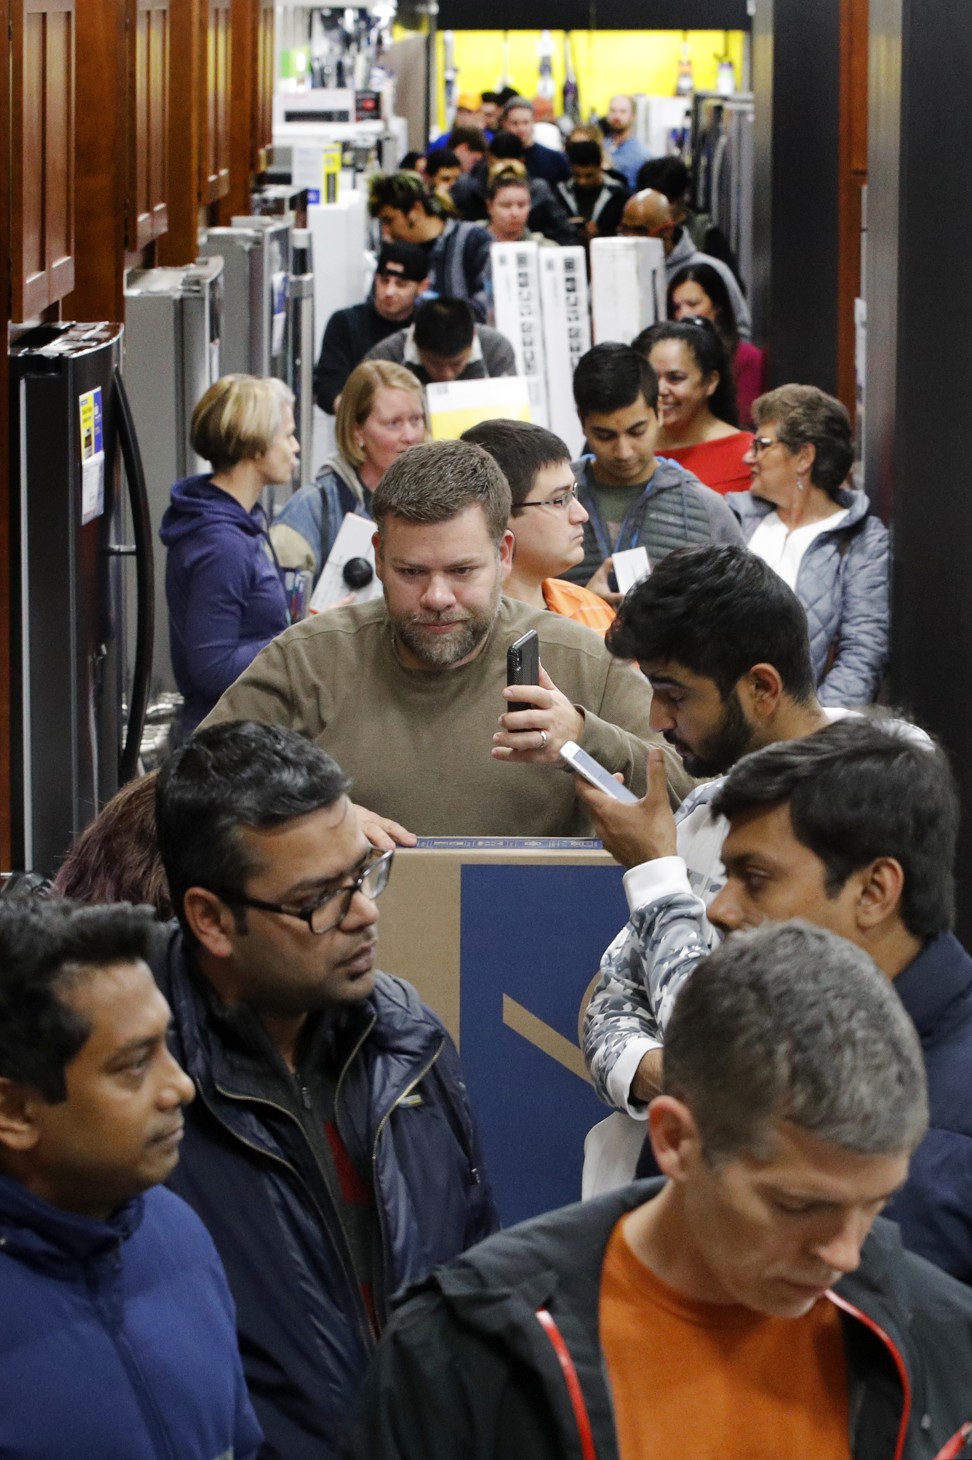 People line up to pay for their purchases during an early Black Friday sale in the United States, which is still the world’s largest consumer market. Photo: AP